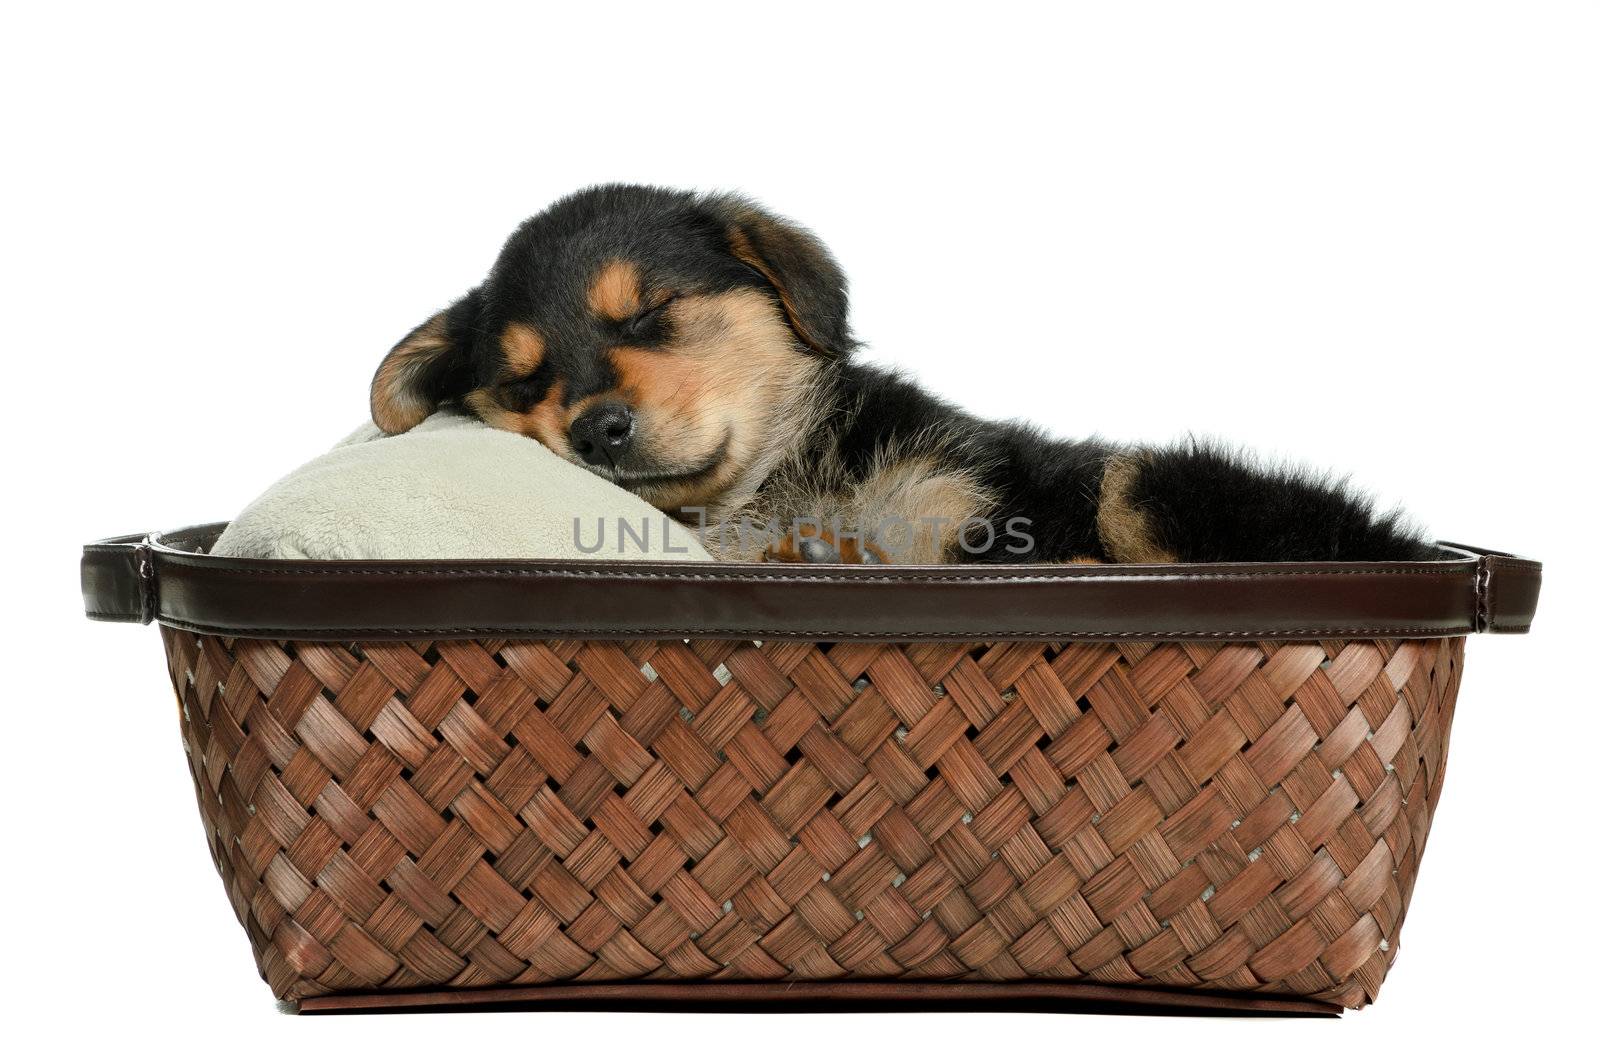 A puppy dog lying in a wicker basket is isolated against a white background.